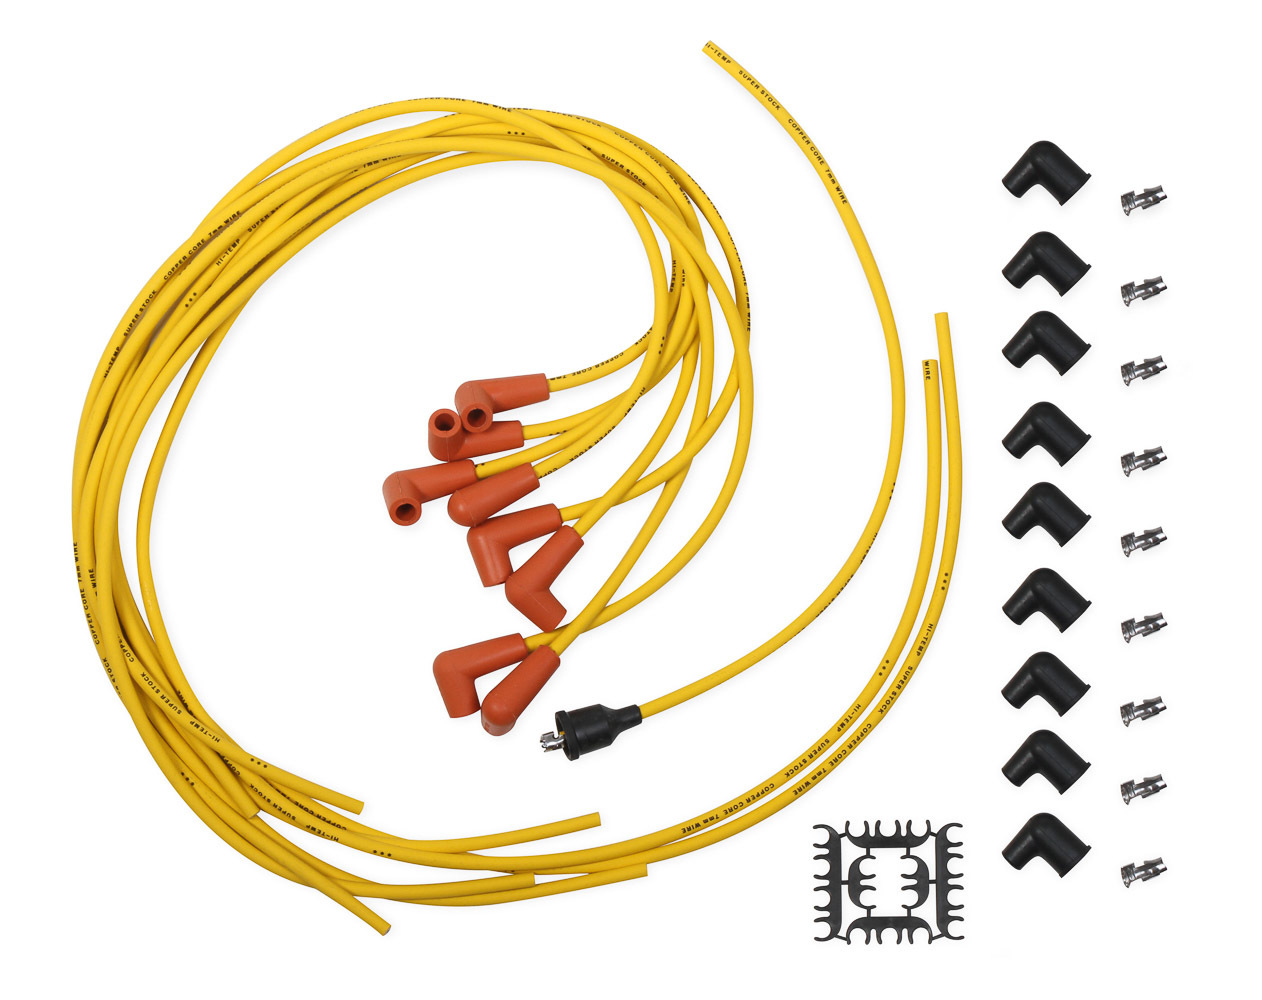 Accel 3009 Spark Plug Wire Set, Super Stock, Spiral Core, 7 mm, Yellow, 90 Degree Plug Boots, Socket Style, Cut-To-Fit, V8, Kit